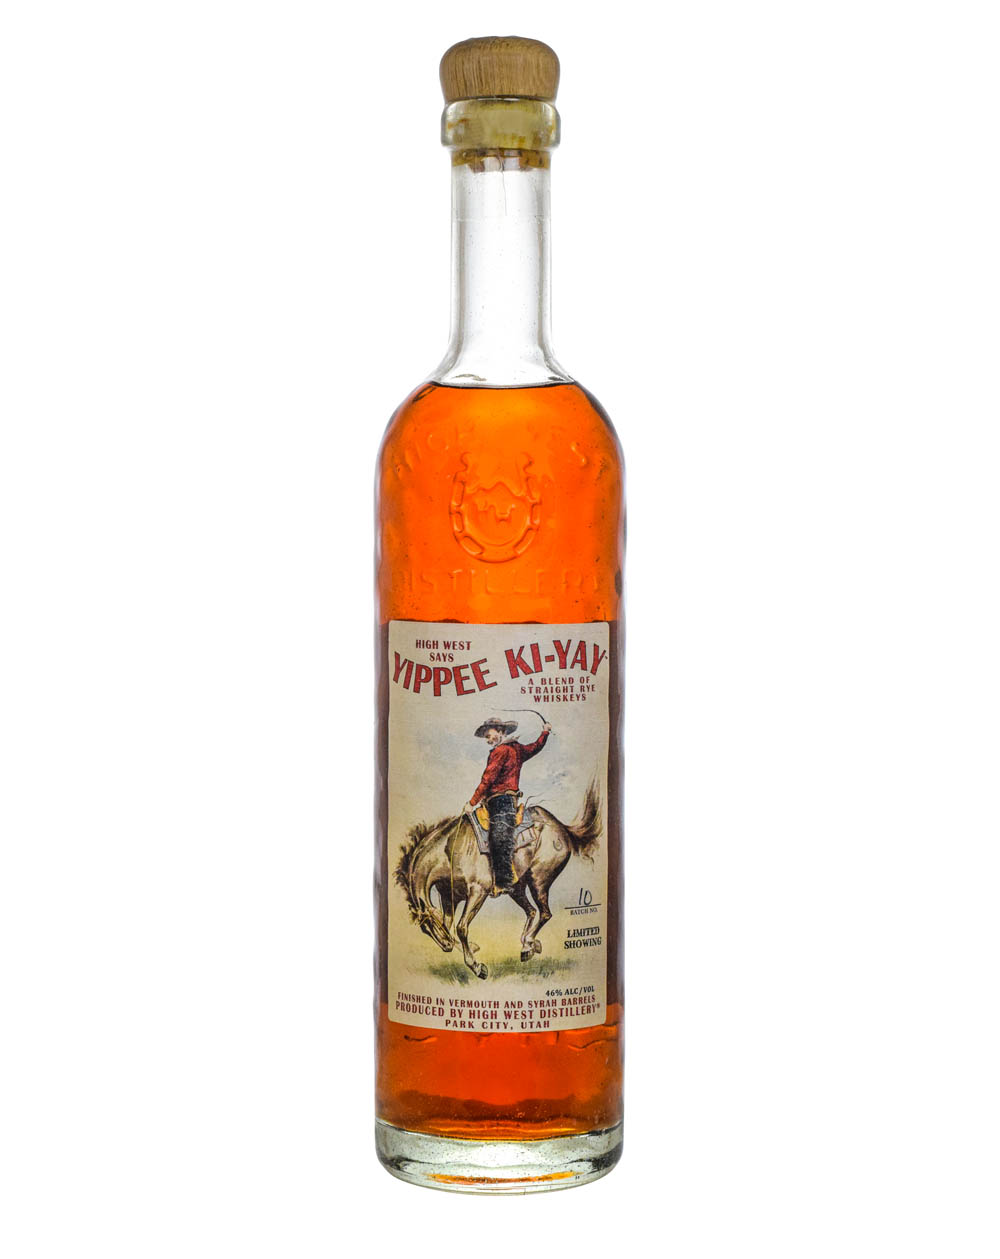 High West Yippee Ki-Yay Limted Showing Batch #10 Must Have Malts MHM